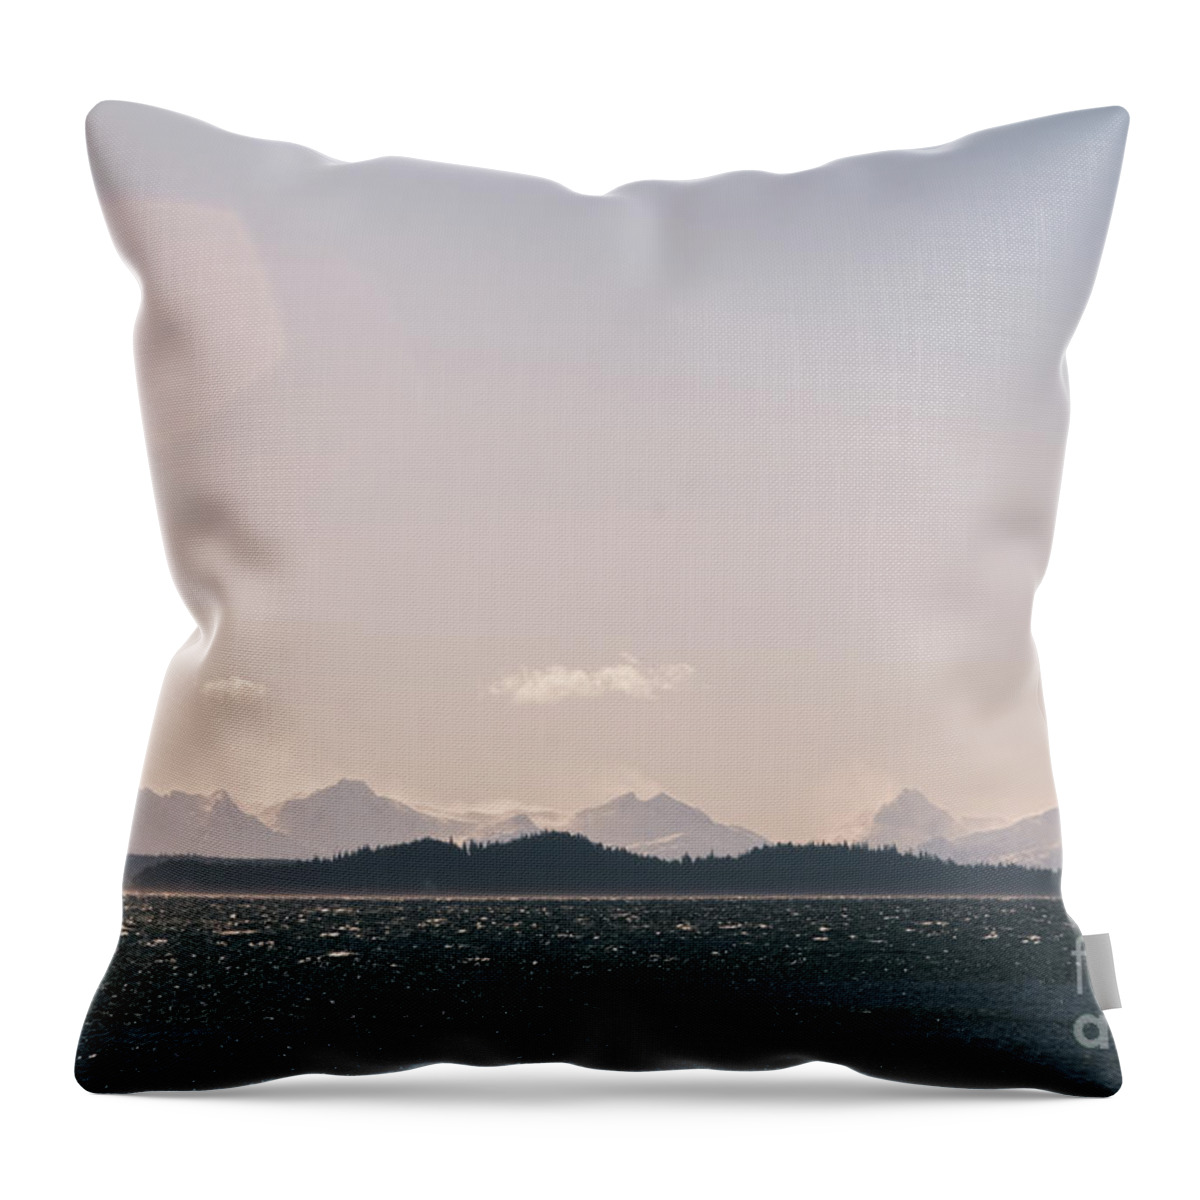 #alaska #ak #juneau #cruise #tours #vacation #peaceful #sealaska #southeastalaska #calm #chilkatmountains #chilkats #capitalcity #lynncanal #clouds #cloudy #clearskies #clearblueskies #blueskies #postcard #spring Throw Pillow featuring the photograph Wind on the Water by Charles Vice